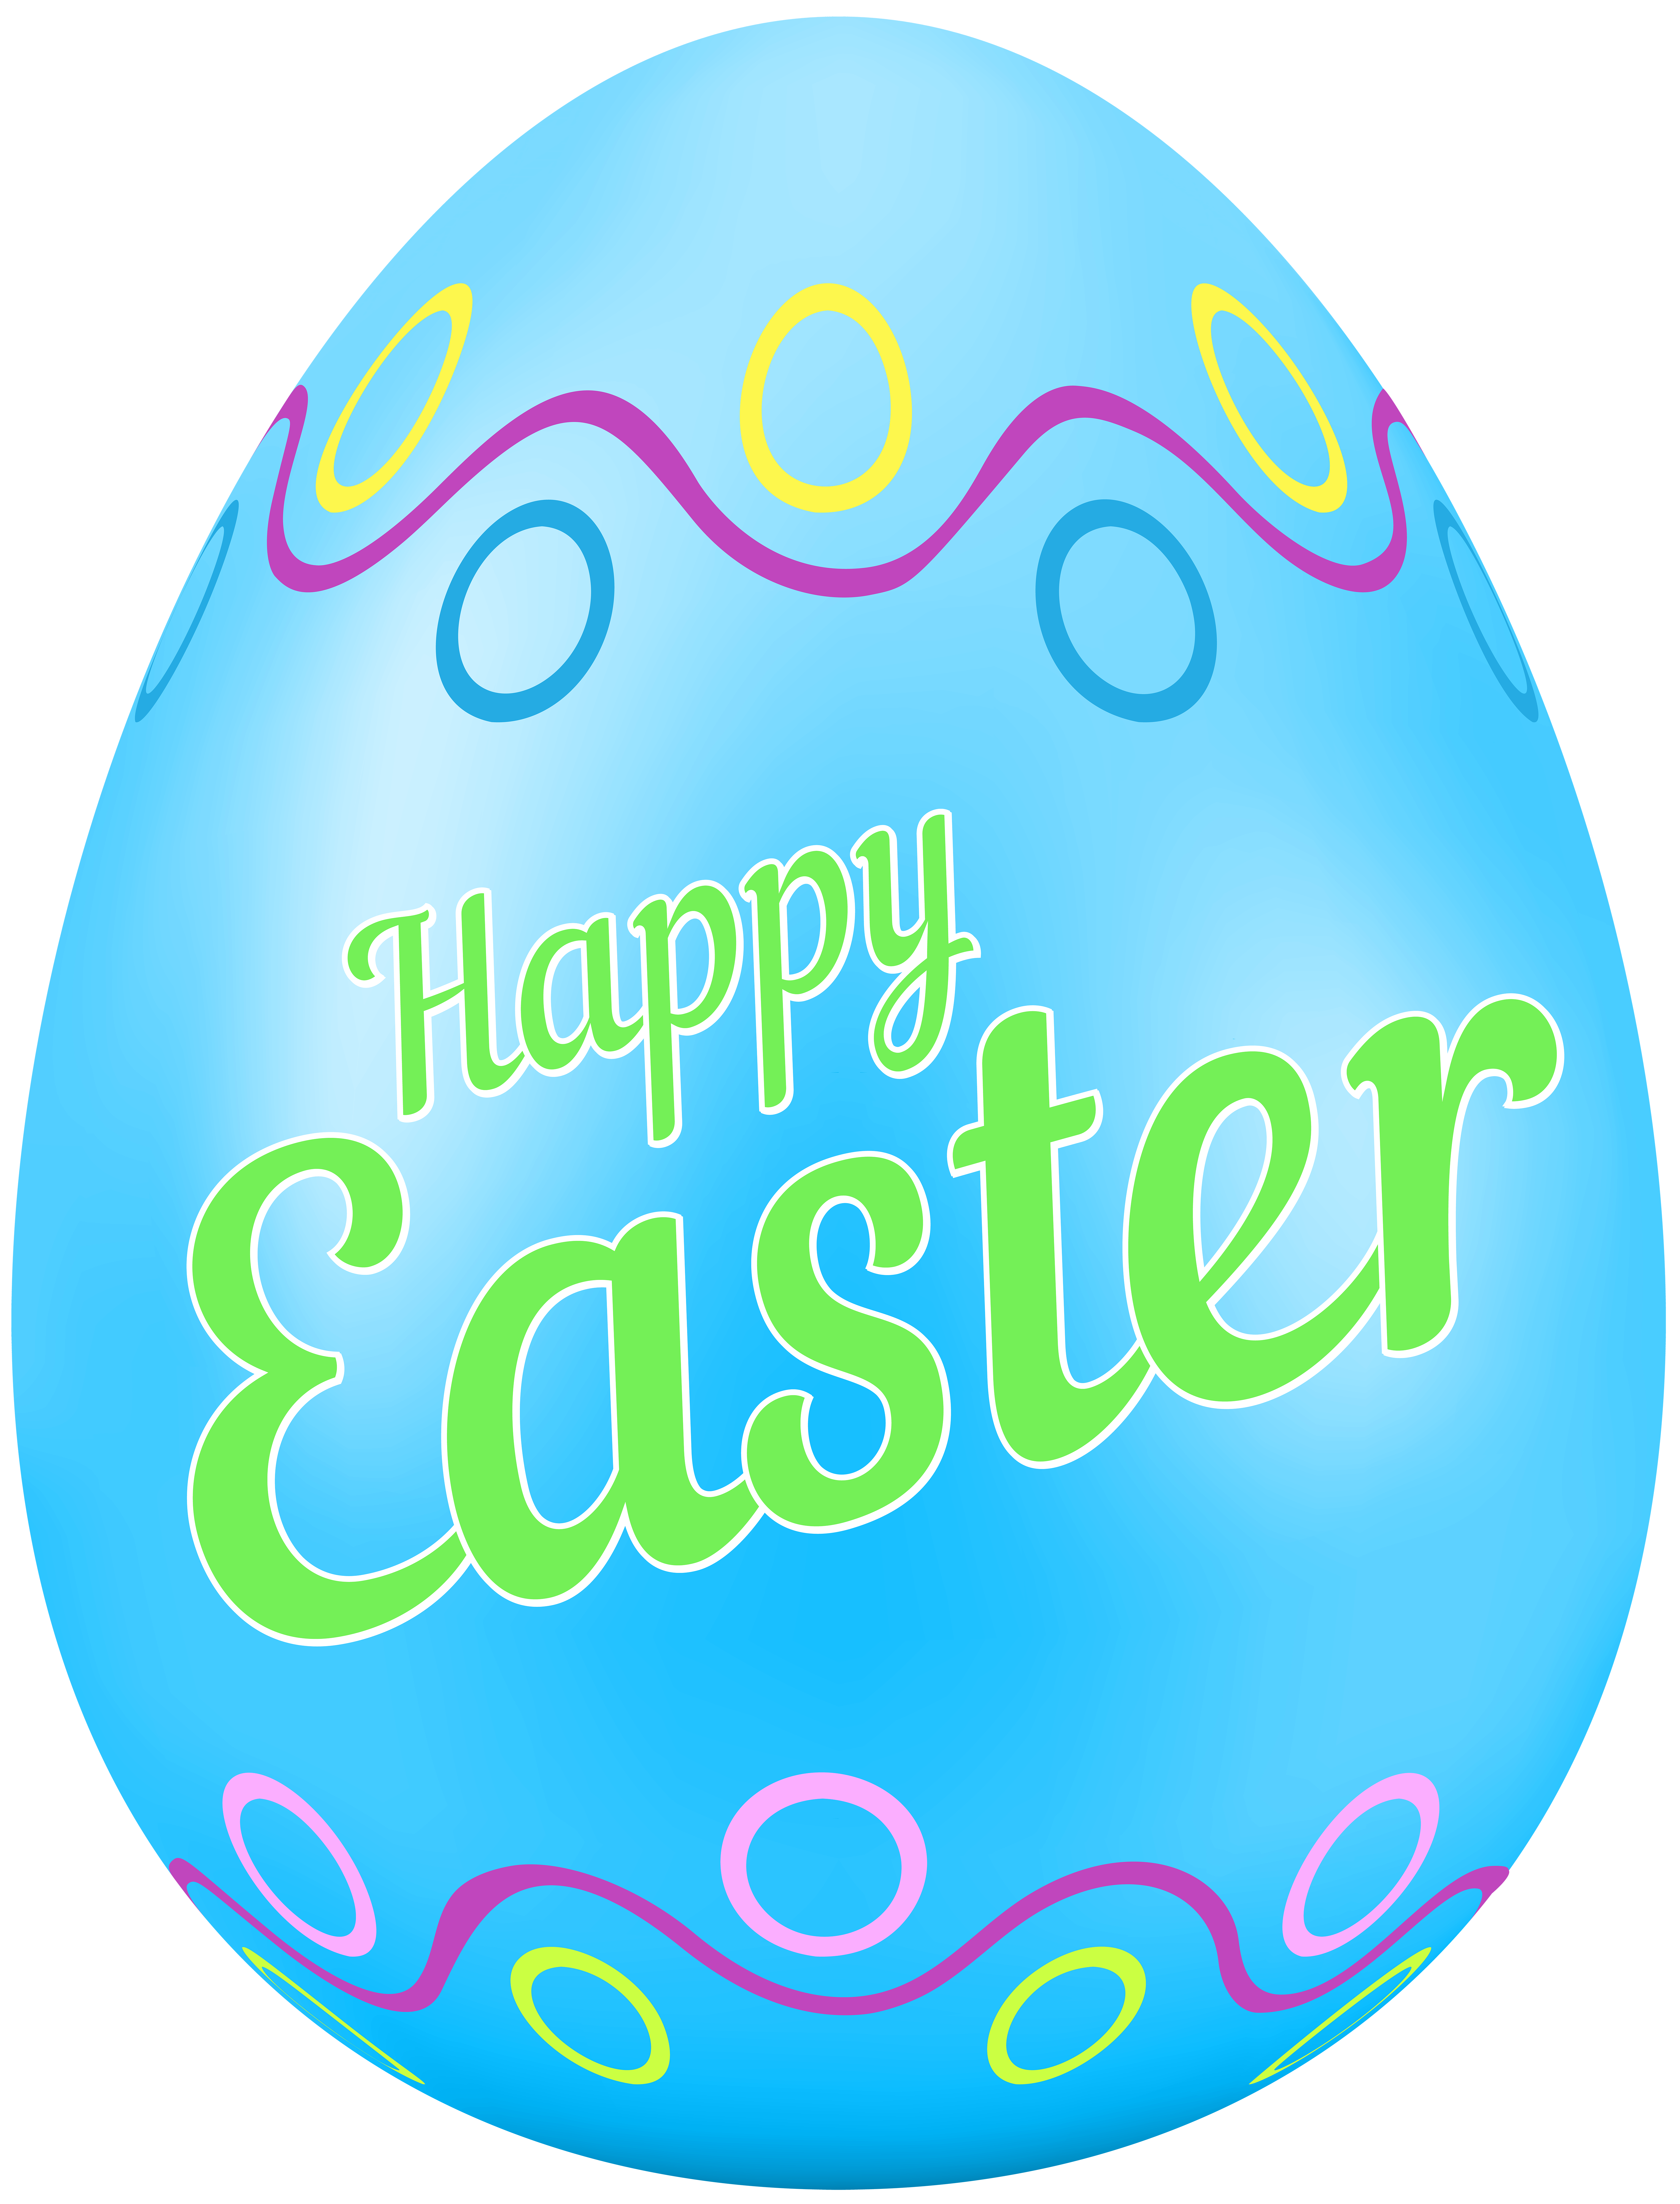 Free: Easter eggs and happy, PNG picture 